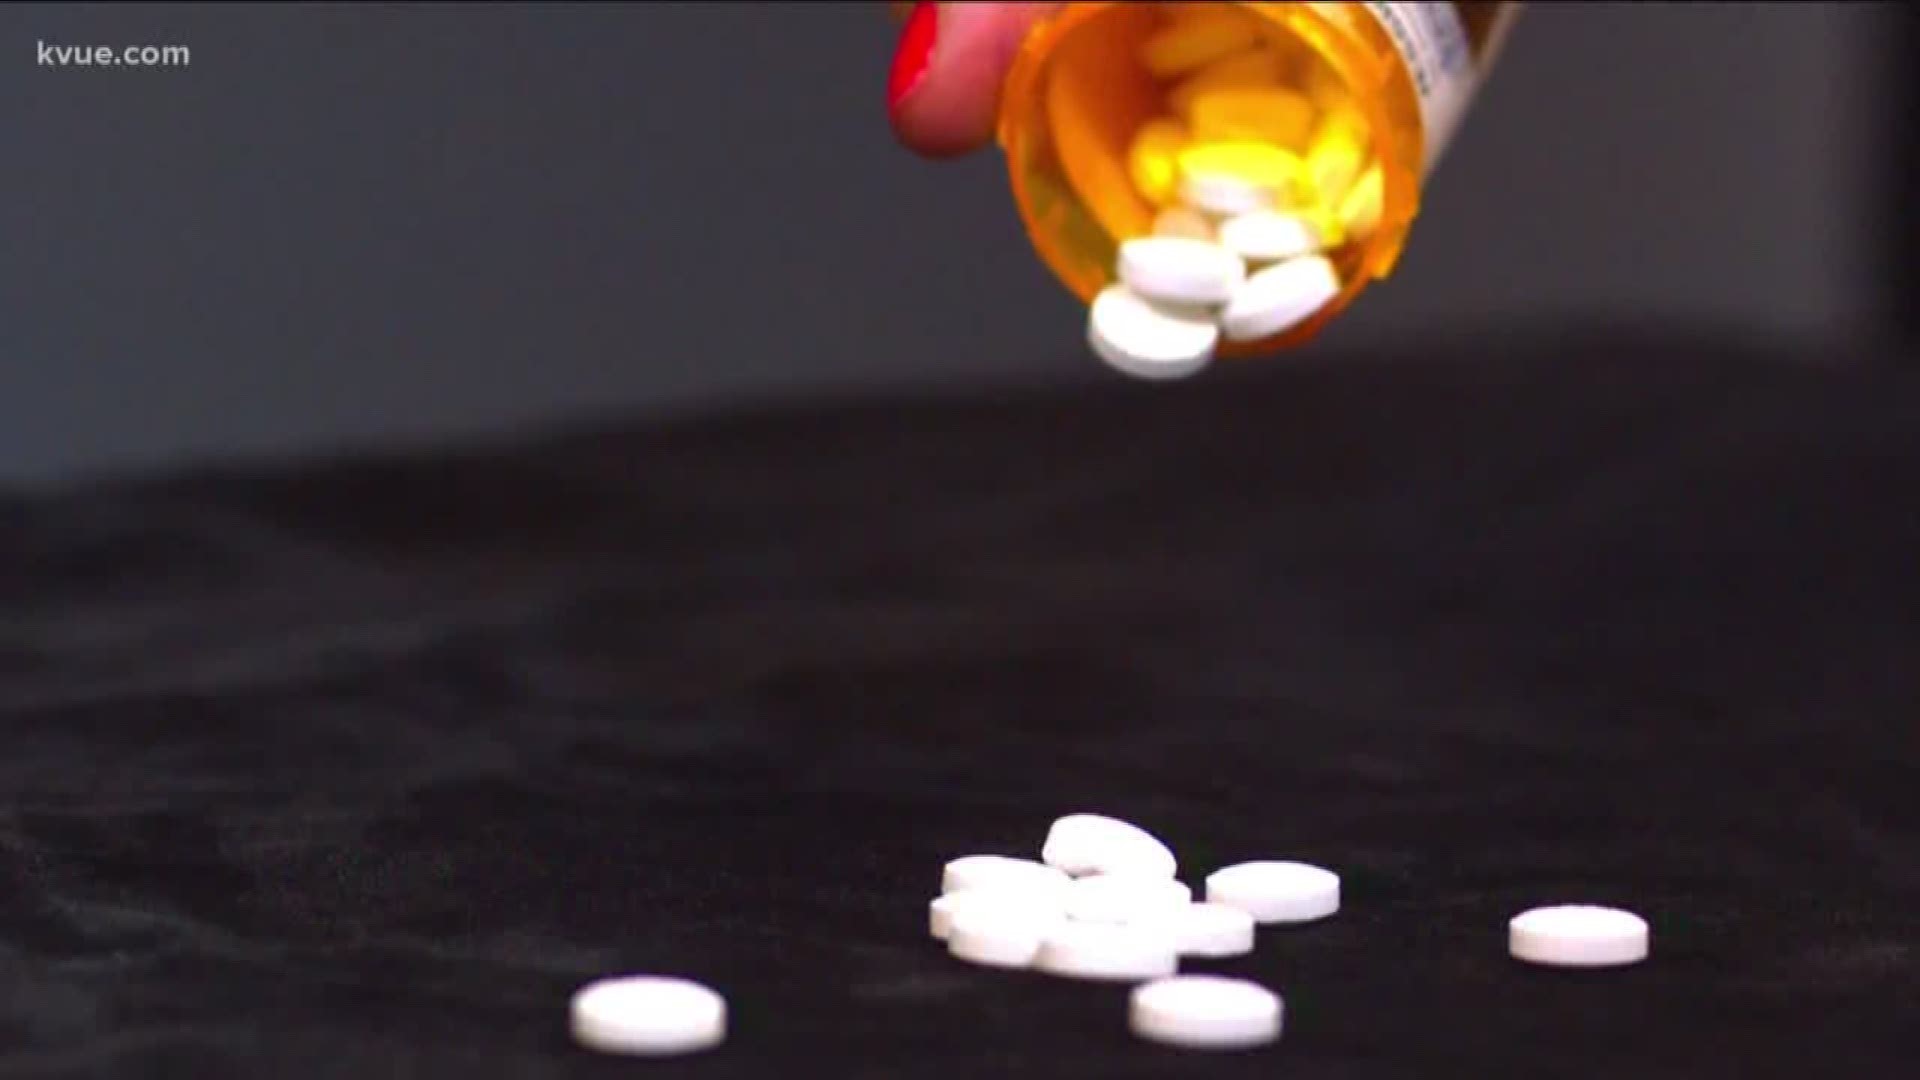 A new medical program coming to Austin could save people from overdoses and get them the help they need faster.